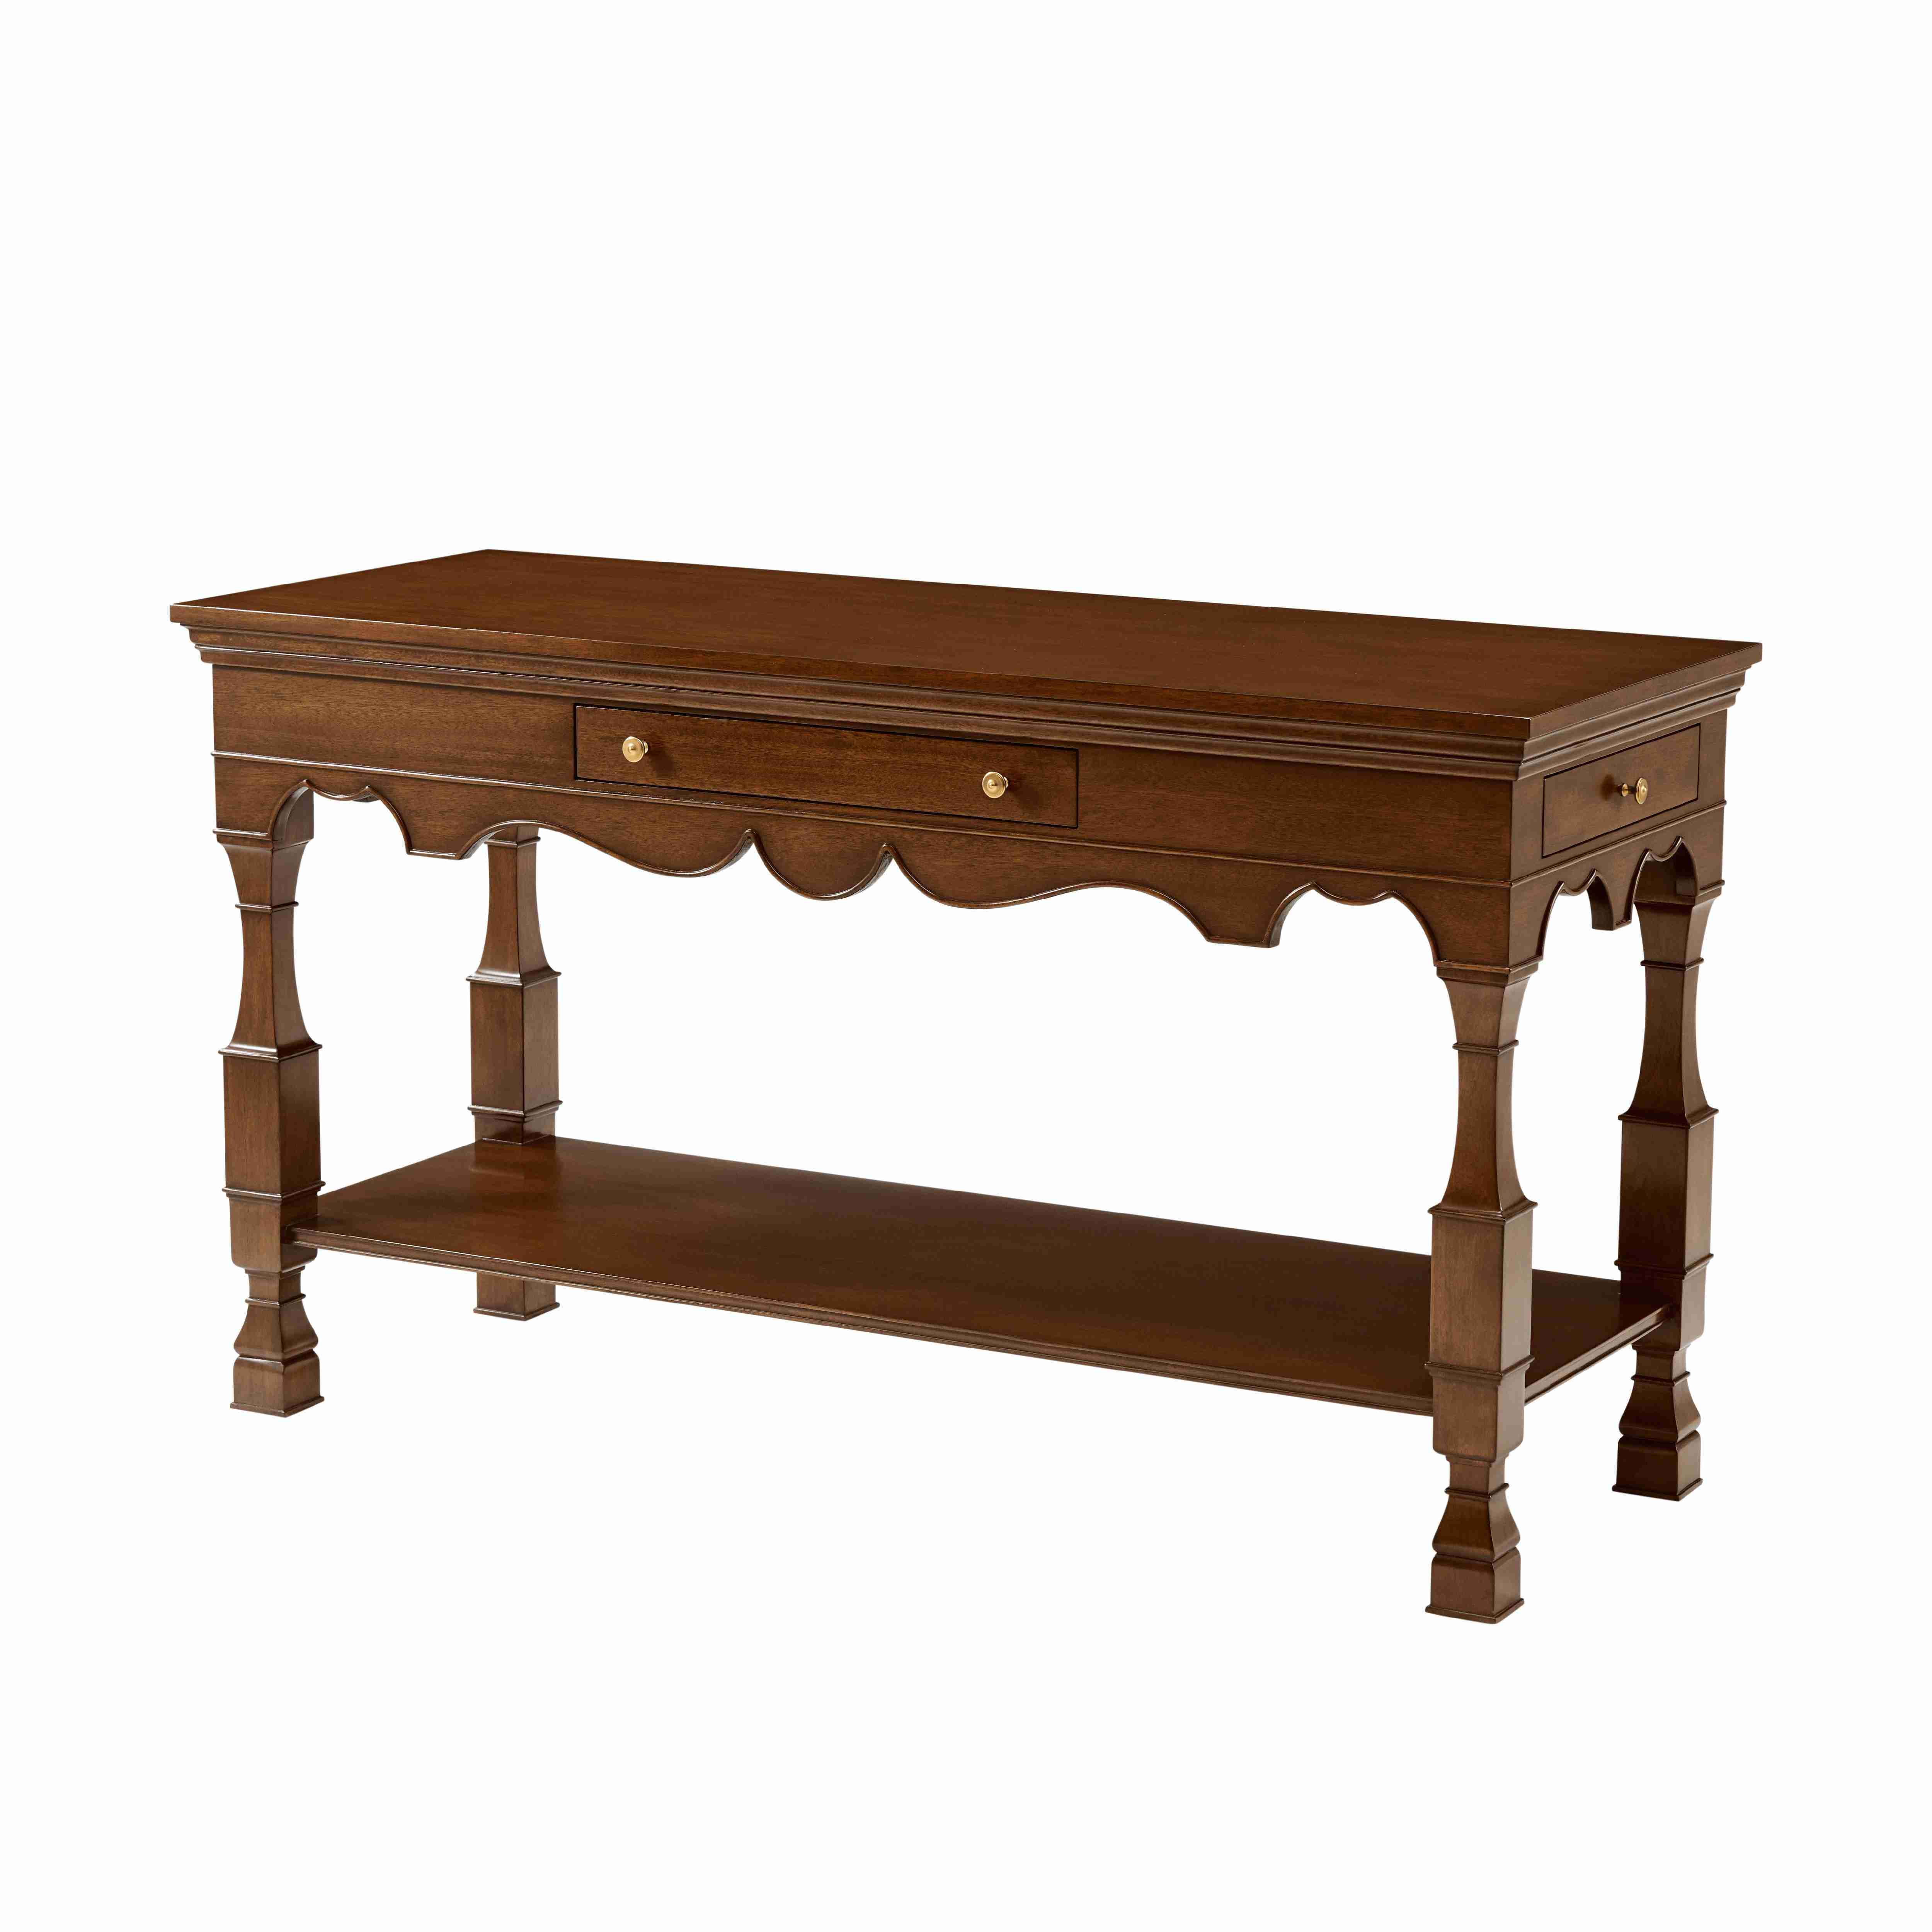 KERRY CONSOLE TABLE